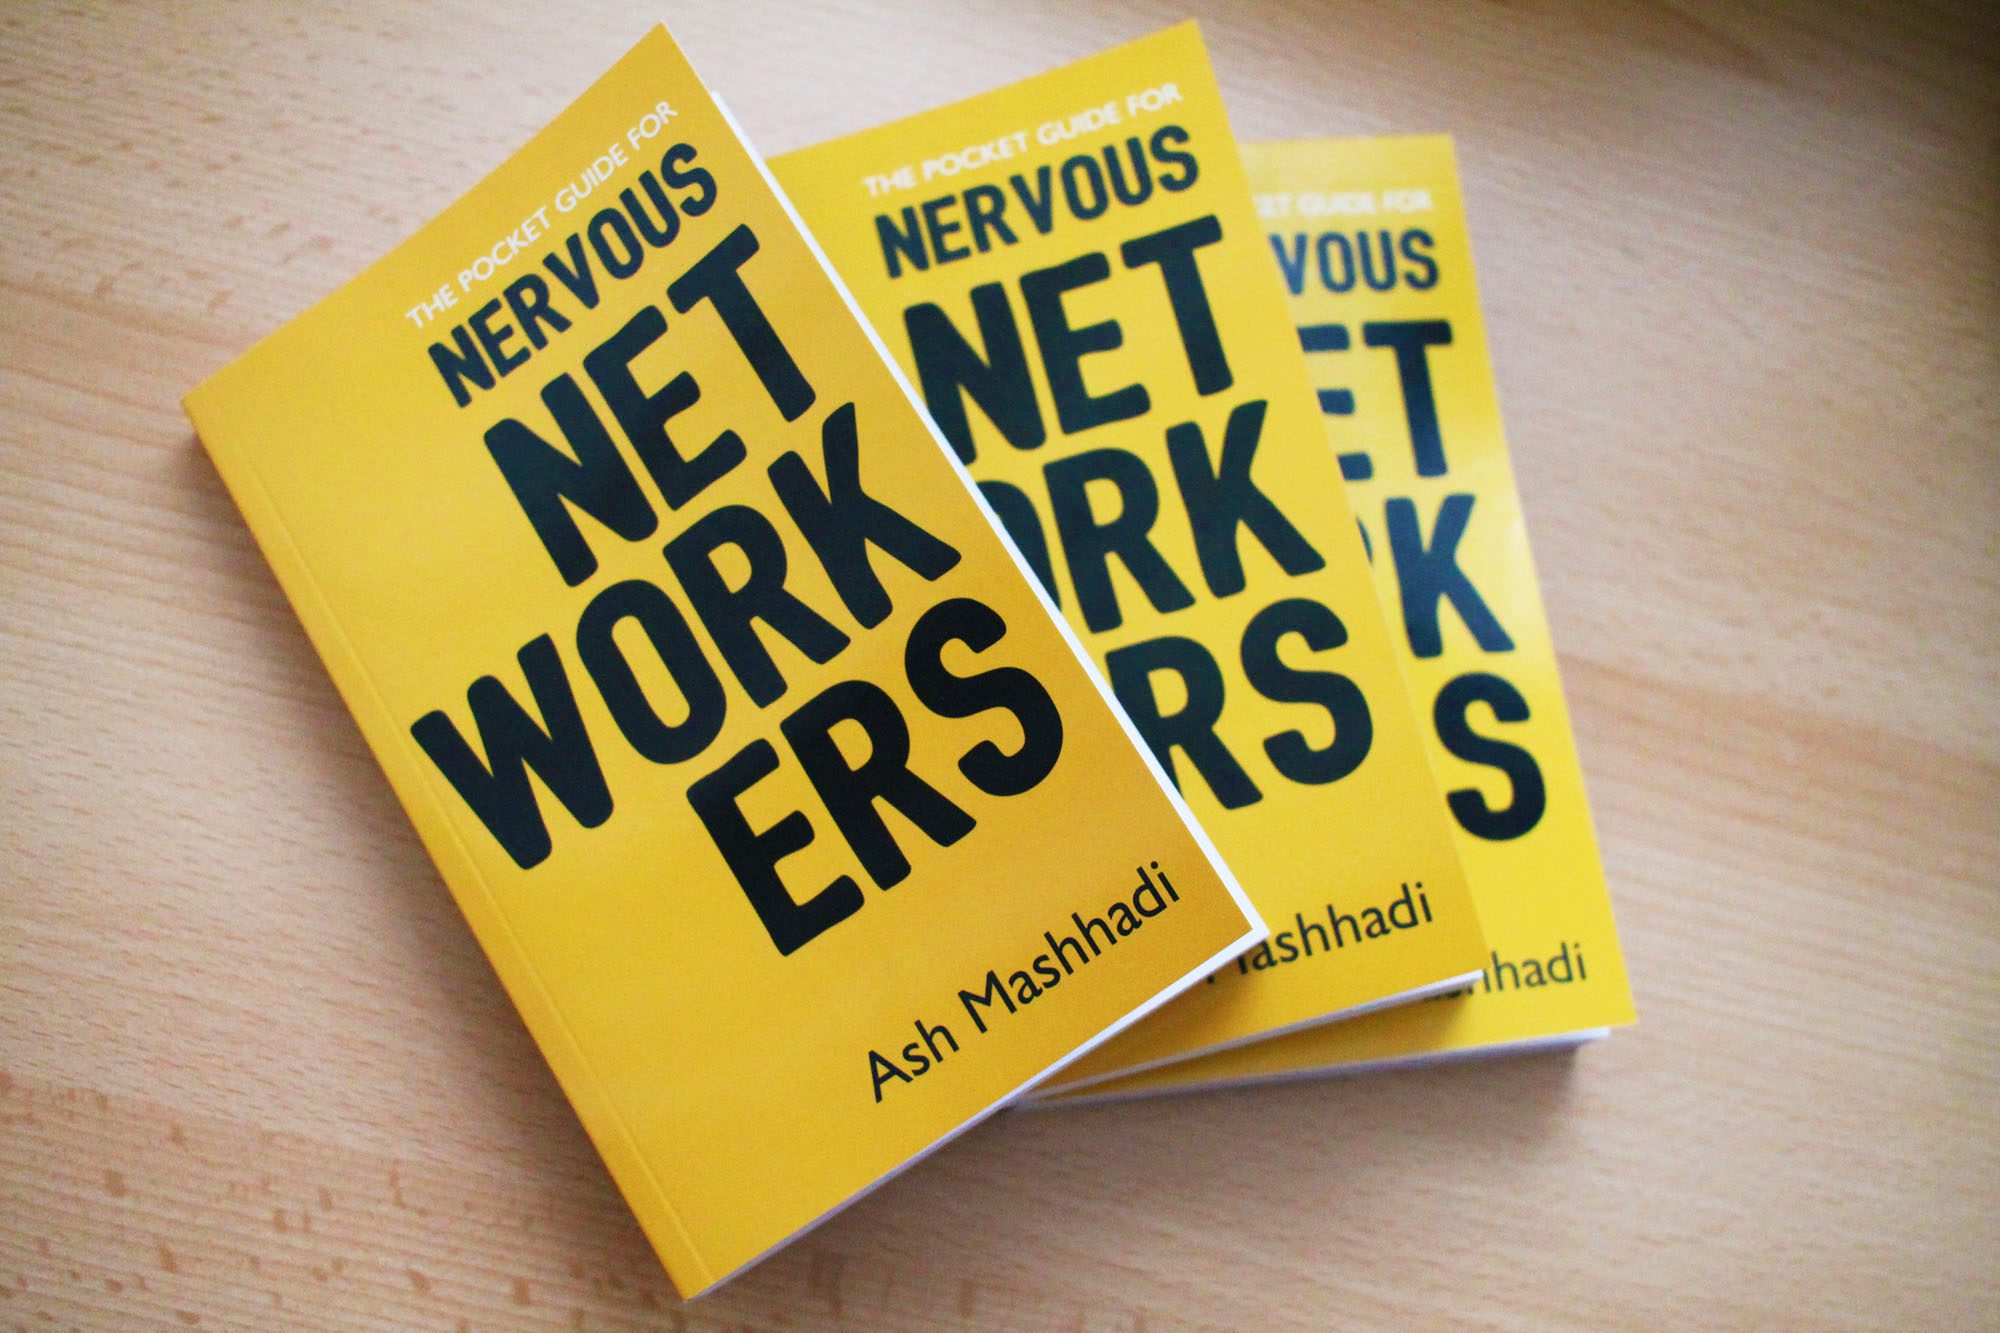 The Pocket Guide for Nervous Networkers